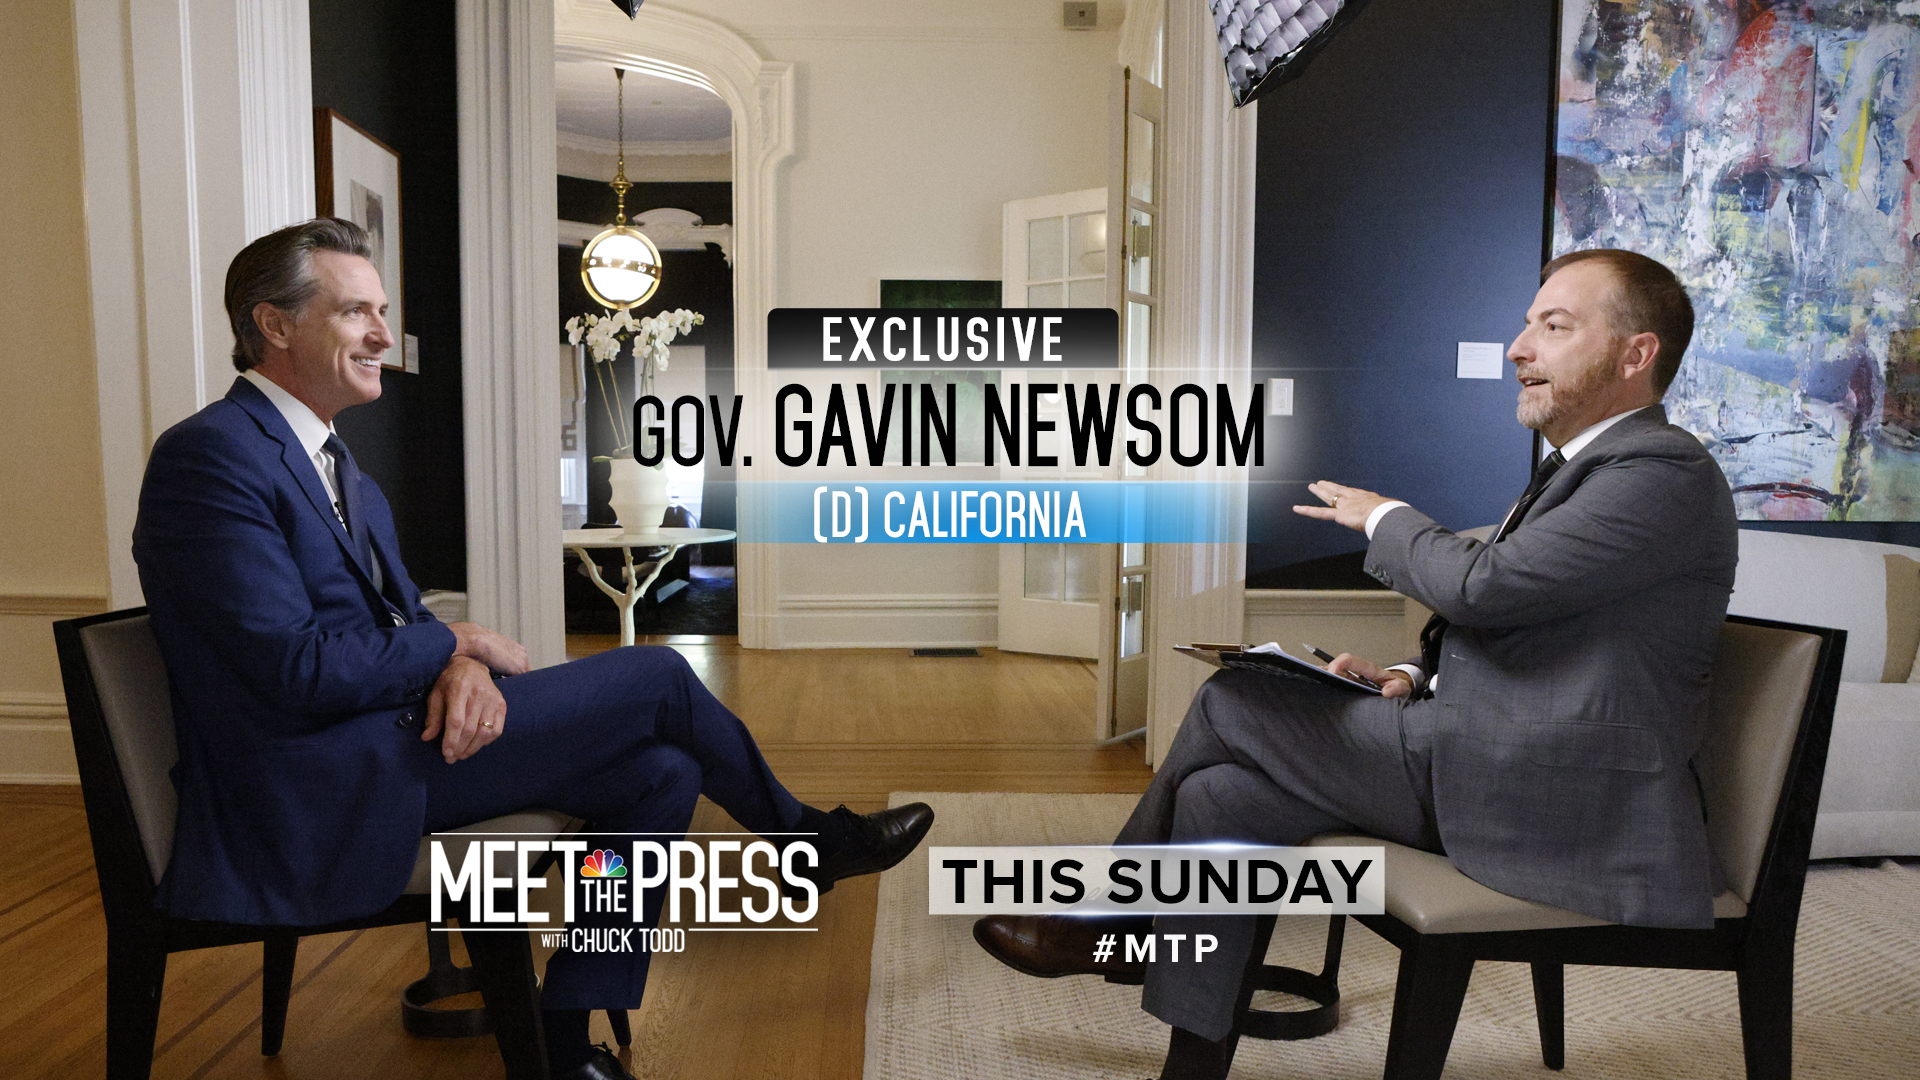 “MEET THE PRESS WITH CHUCK TODD” TO AIR EXCLUSIVE SIT-DOWN WITH CALIFORNIA GOV. GAVIN NEWSOM THIS SUNDAY